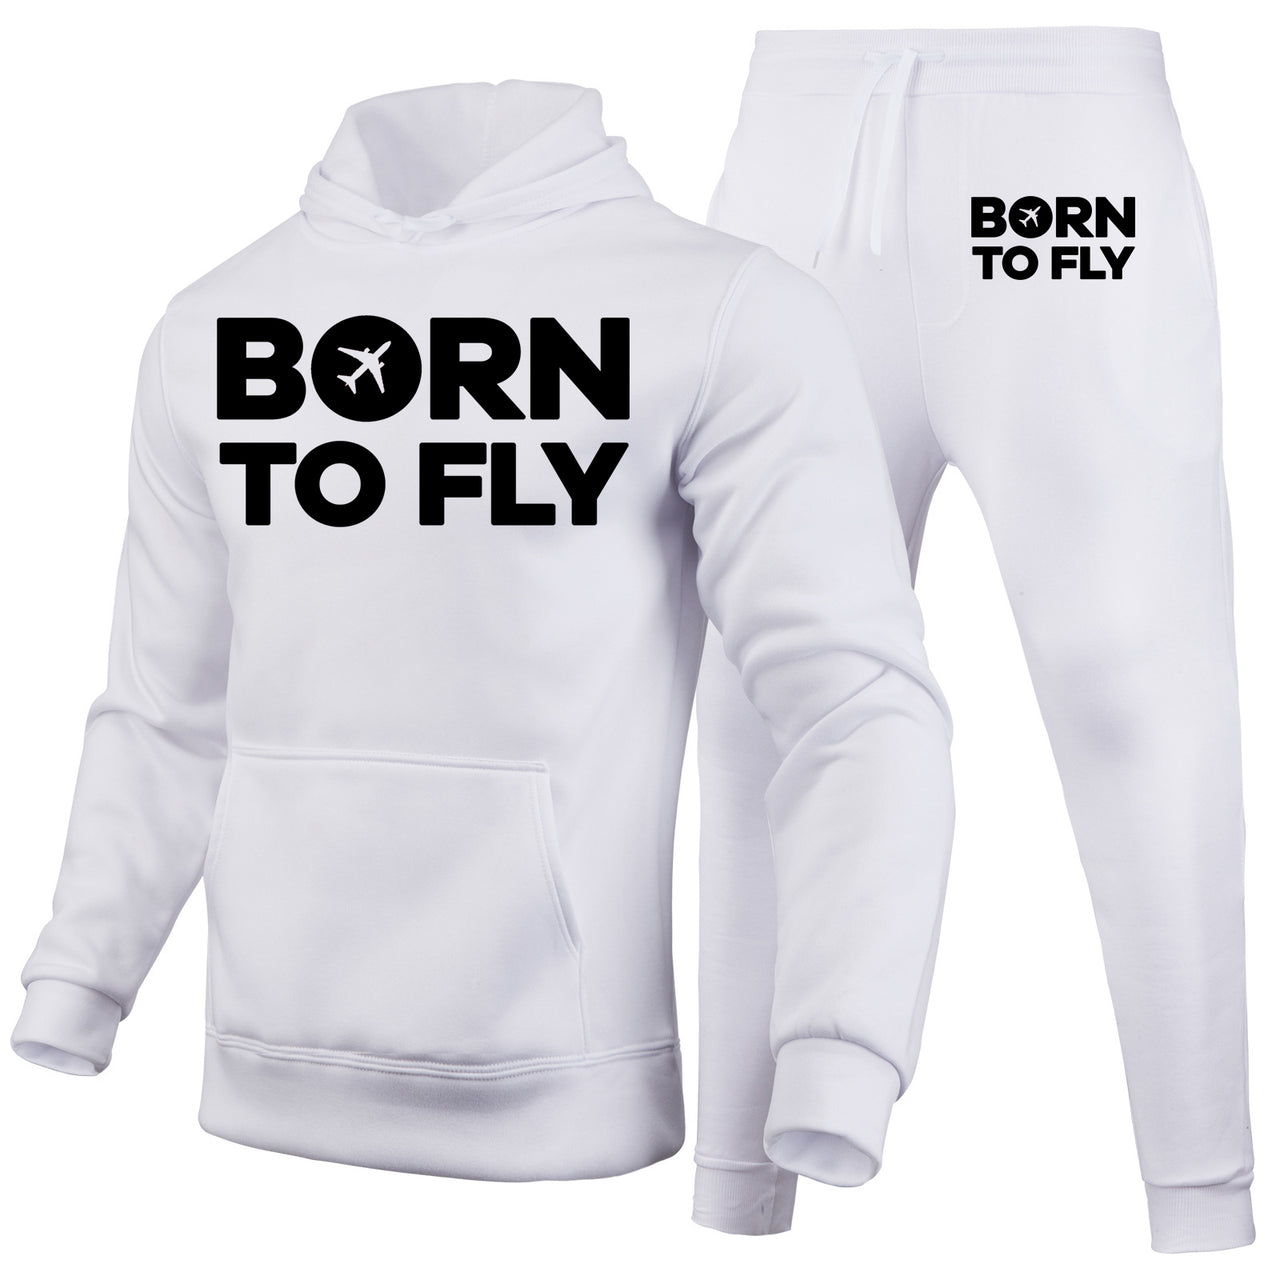 Born To Fly Special Designed Hoodies & Sweatpants Set